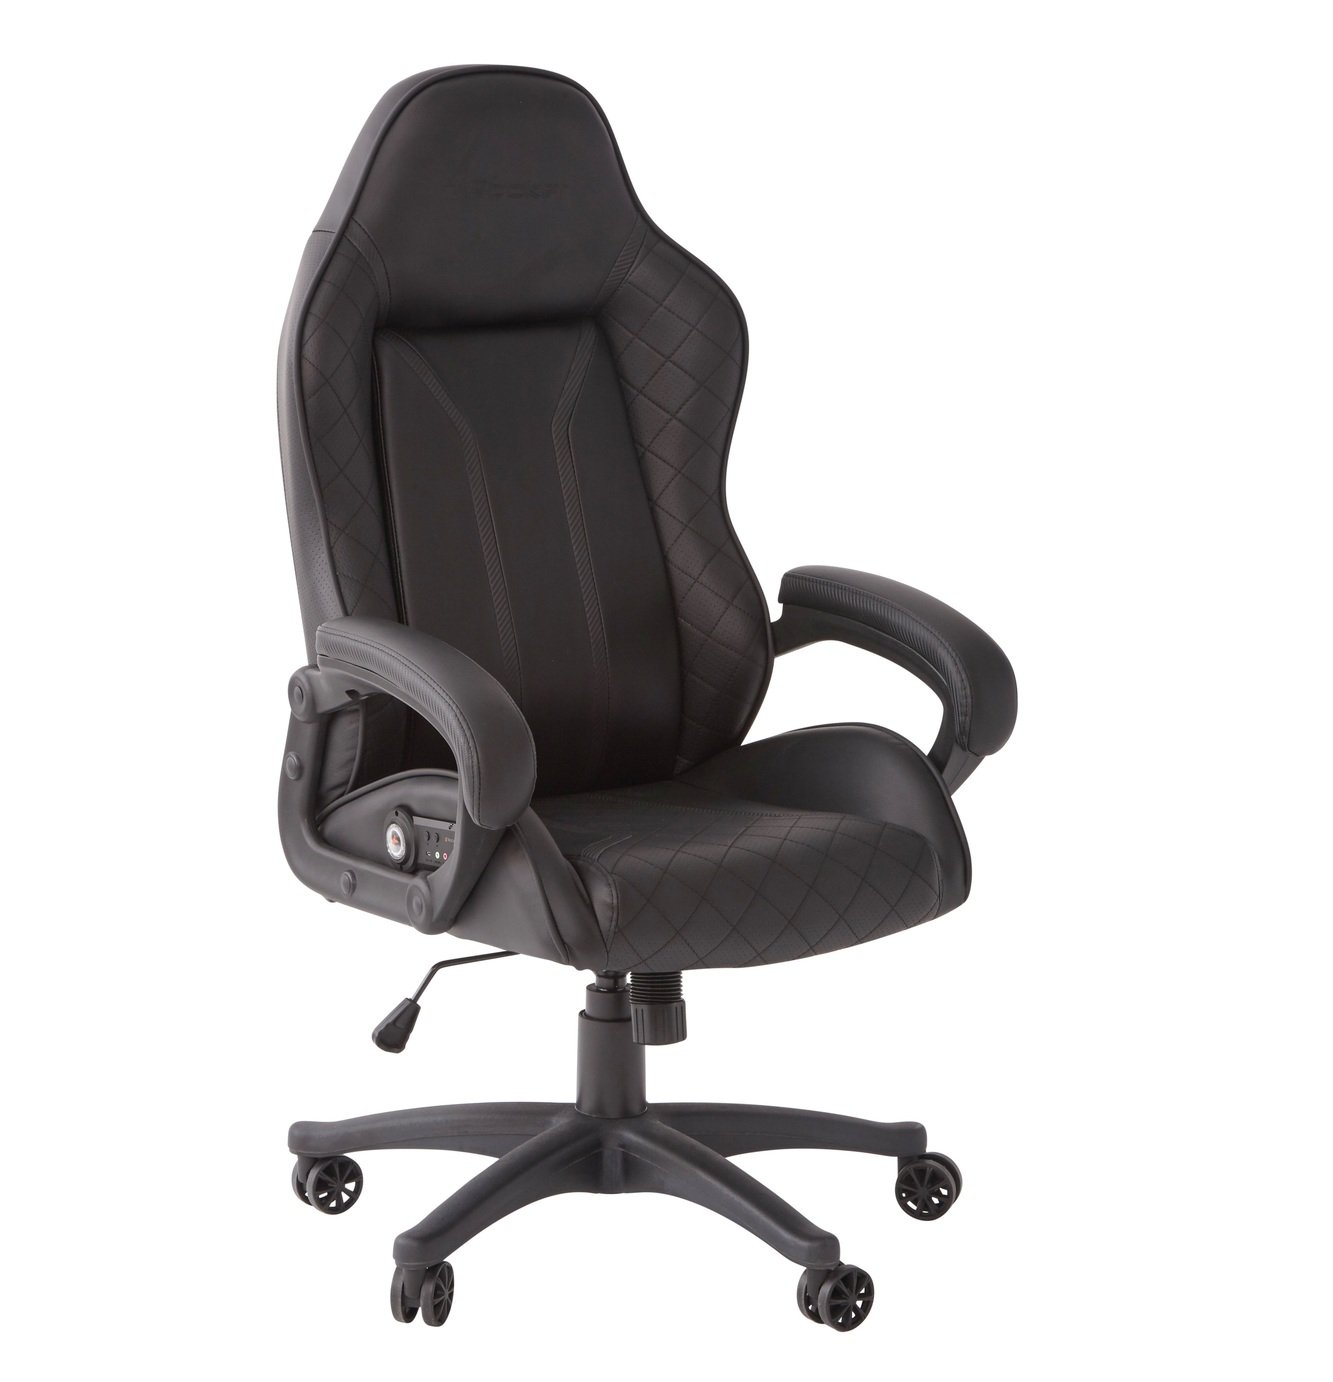 X Rocker Tempest Faux Leather Gaming Chair - Black